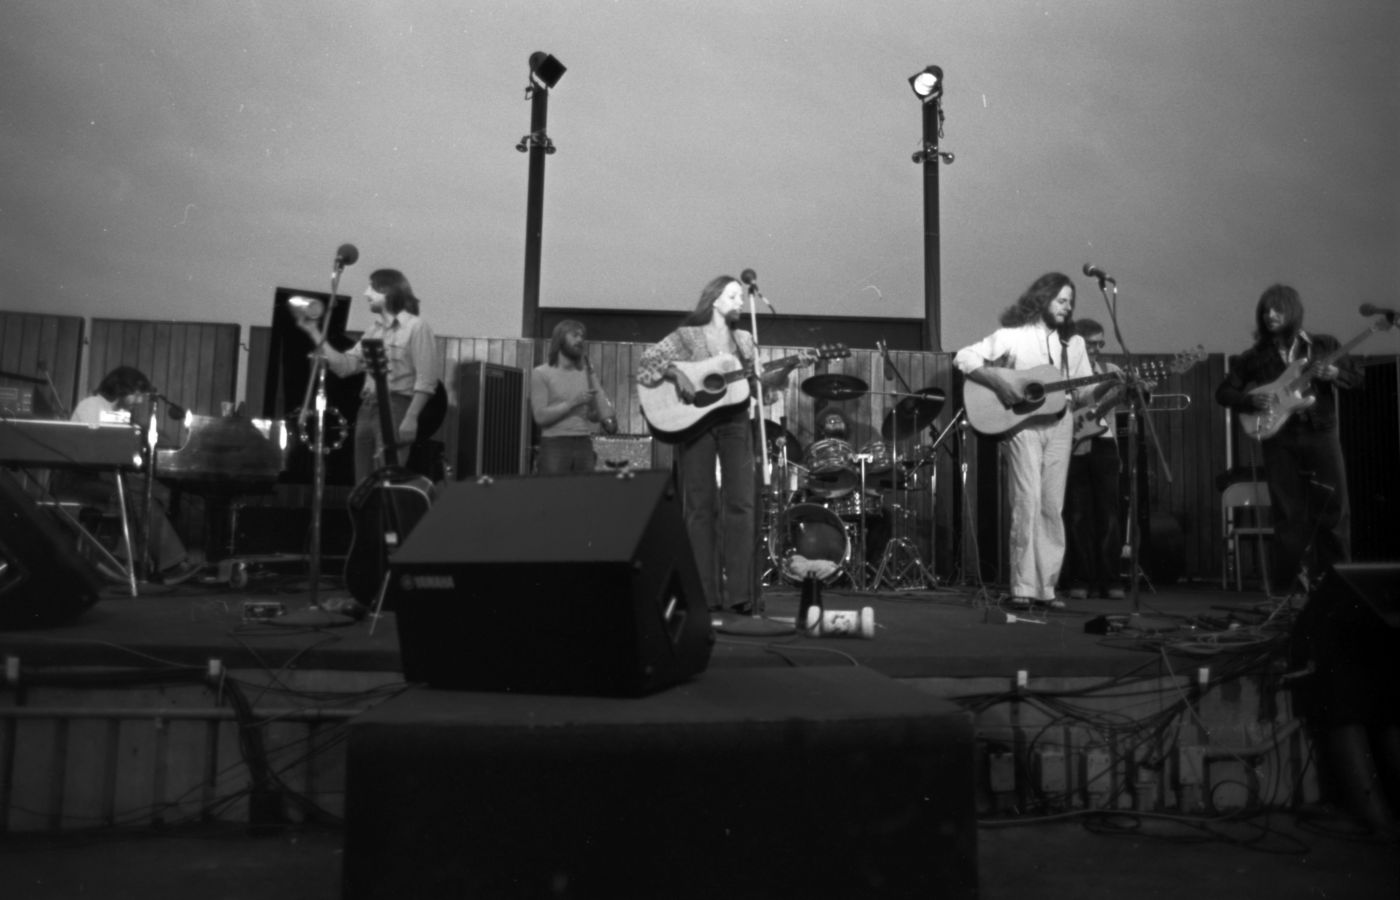 "Black and white photograph of seven musicians (three guitarists, a bassist, a pianist, and two percussionists) on an outdoor stage in dim light. The group includes six long-haired men and a woman, of mature age, wearing casual clothes.  "